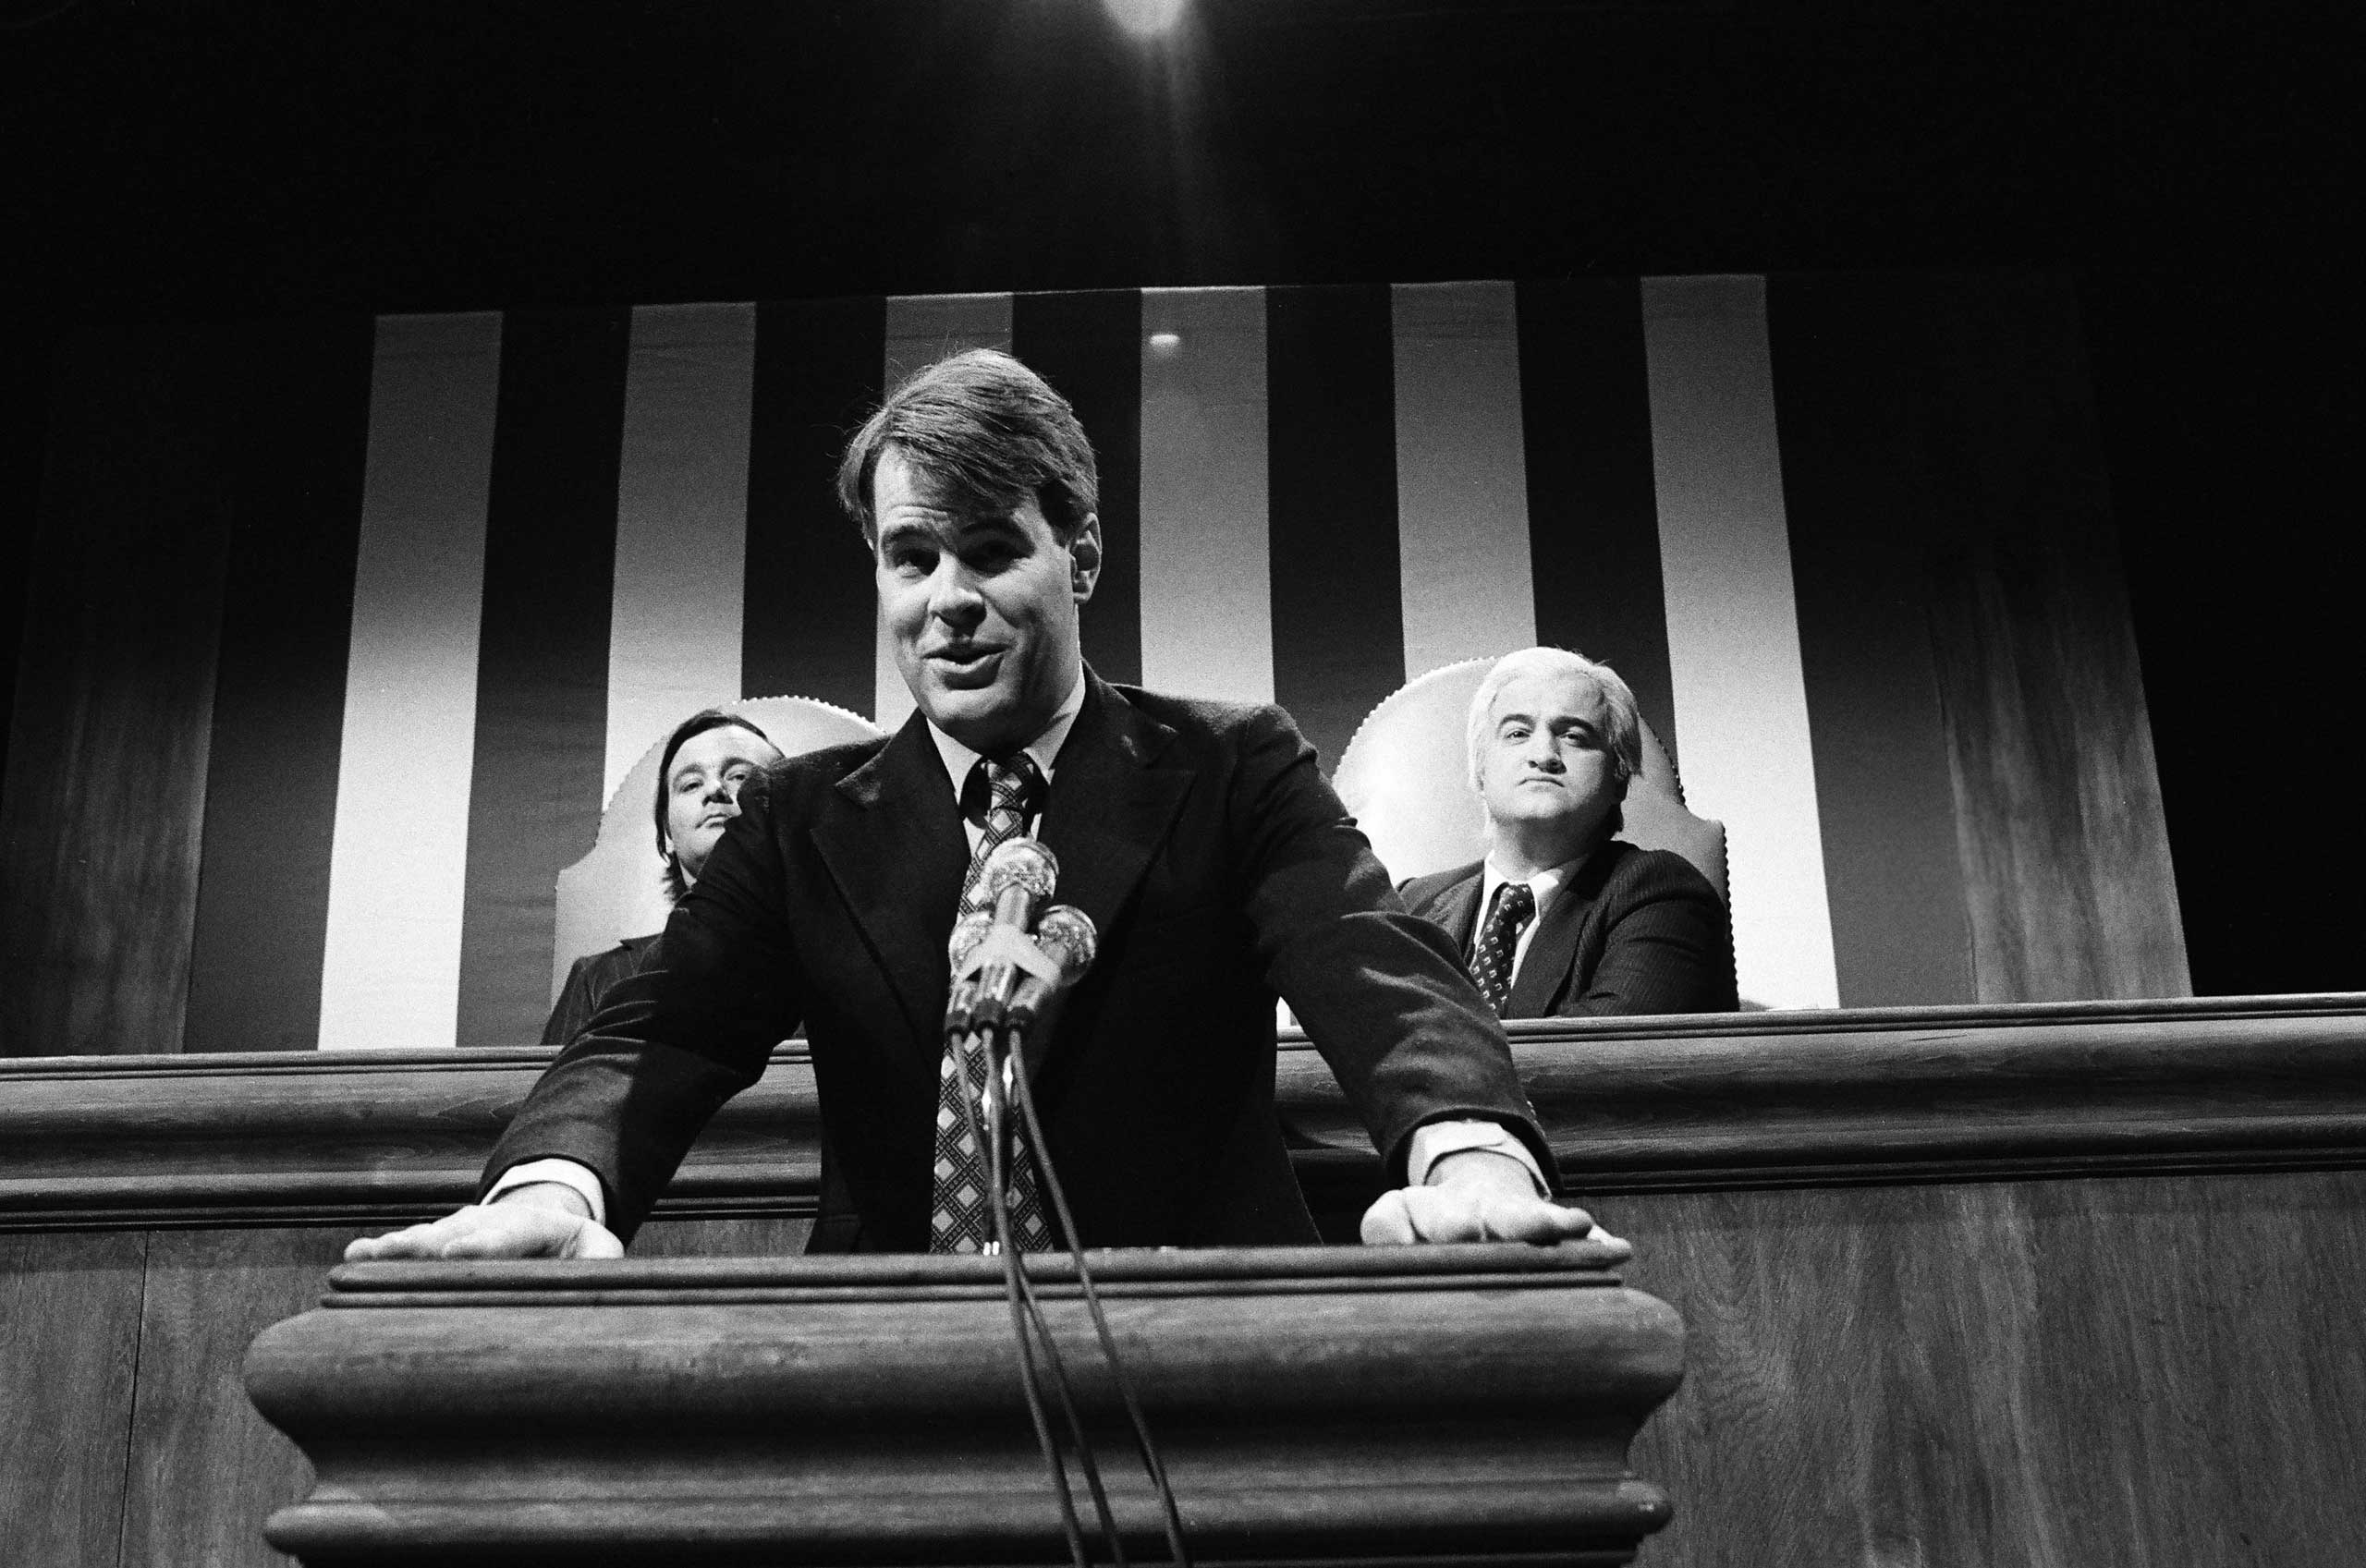 Bill Murray as Walter Mondale, Dan Aykroyd as President Jimmy Carter, and John Belushi as Tip O'Neil during the 'State of the Union 1979' skit on Jan. 27, 1979.